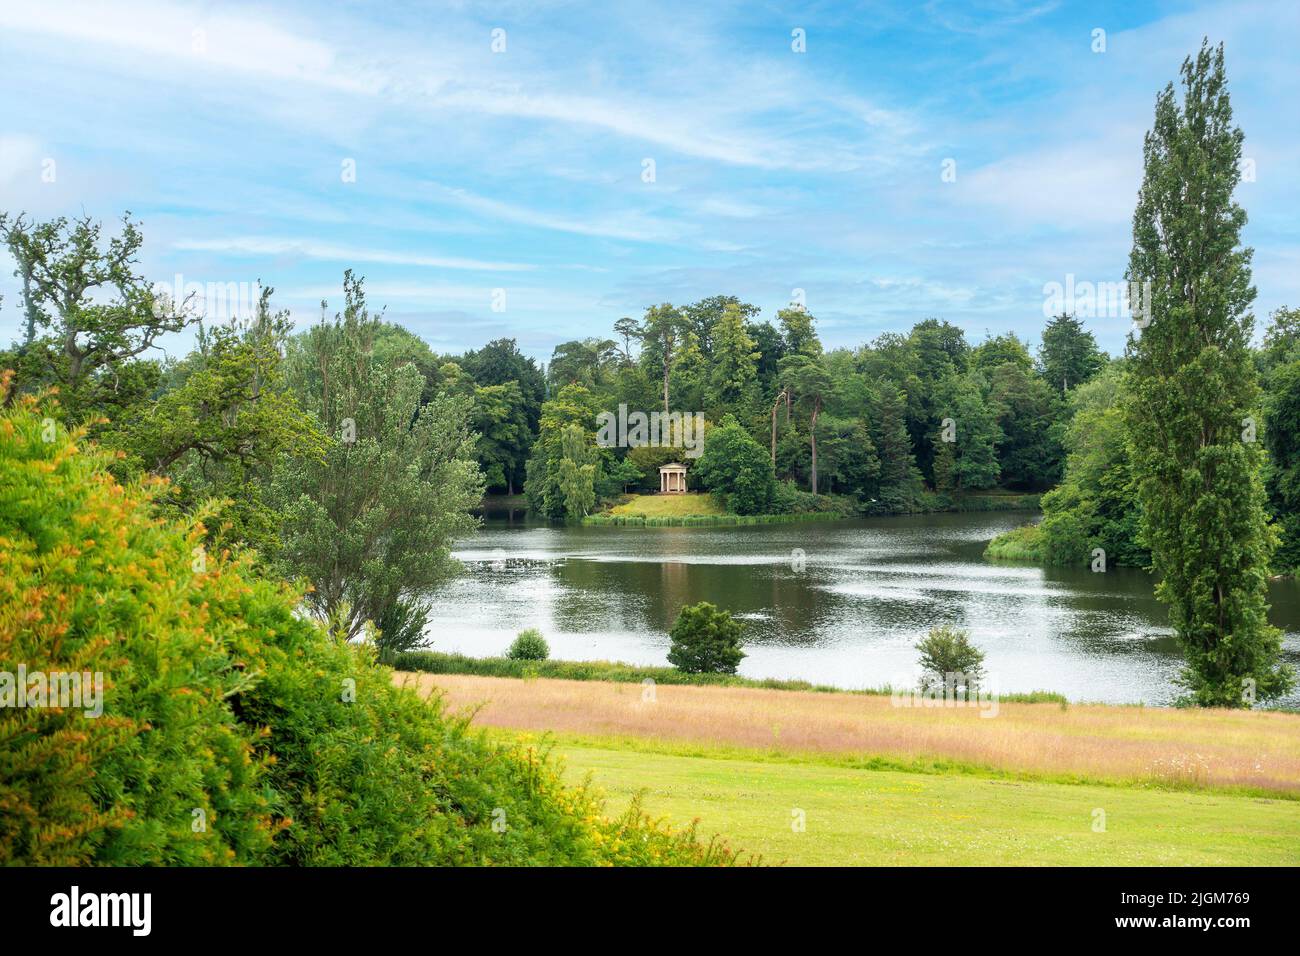 Lake and Temple, Bowood House and Gardens, Wiltshire, Regno Unito Foto Stock